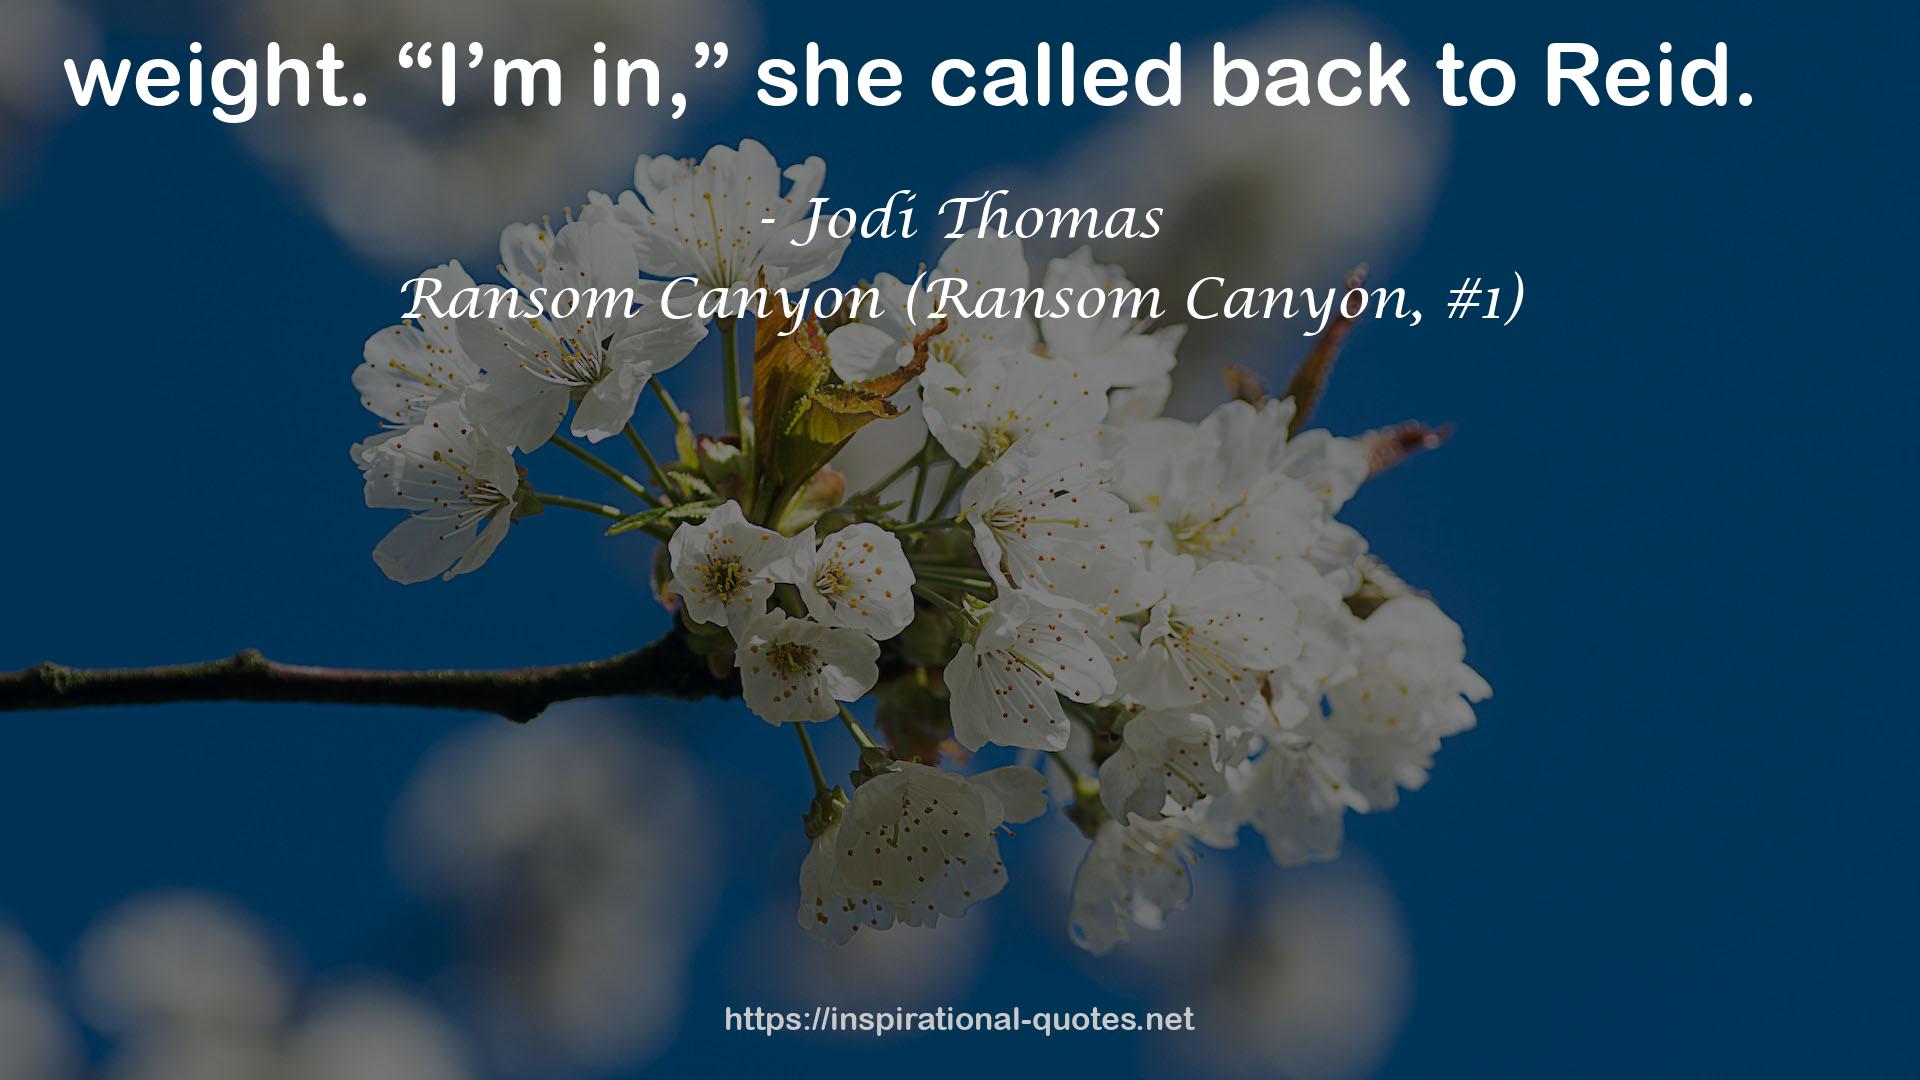 Ransom Canyon (Ransom Canyon, #1) QUOTES